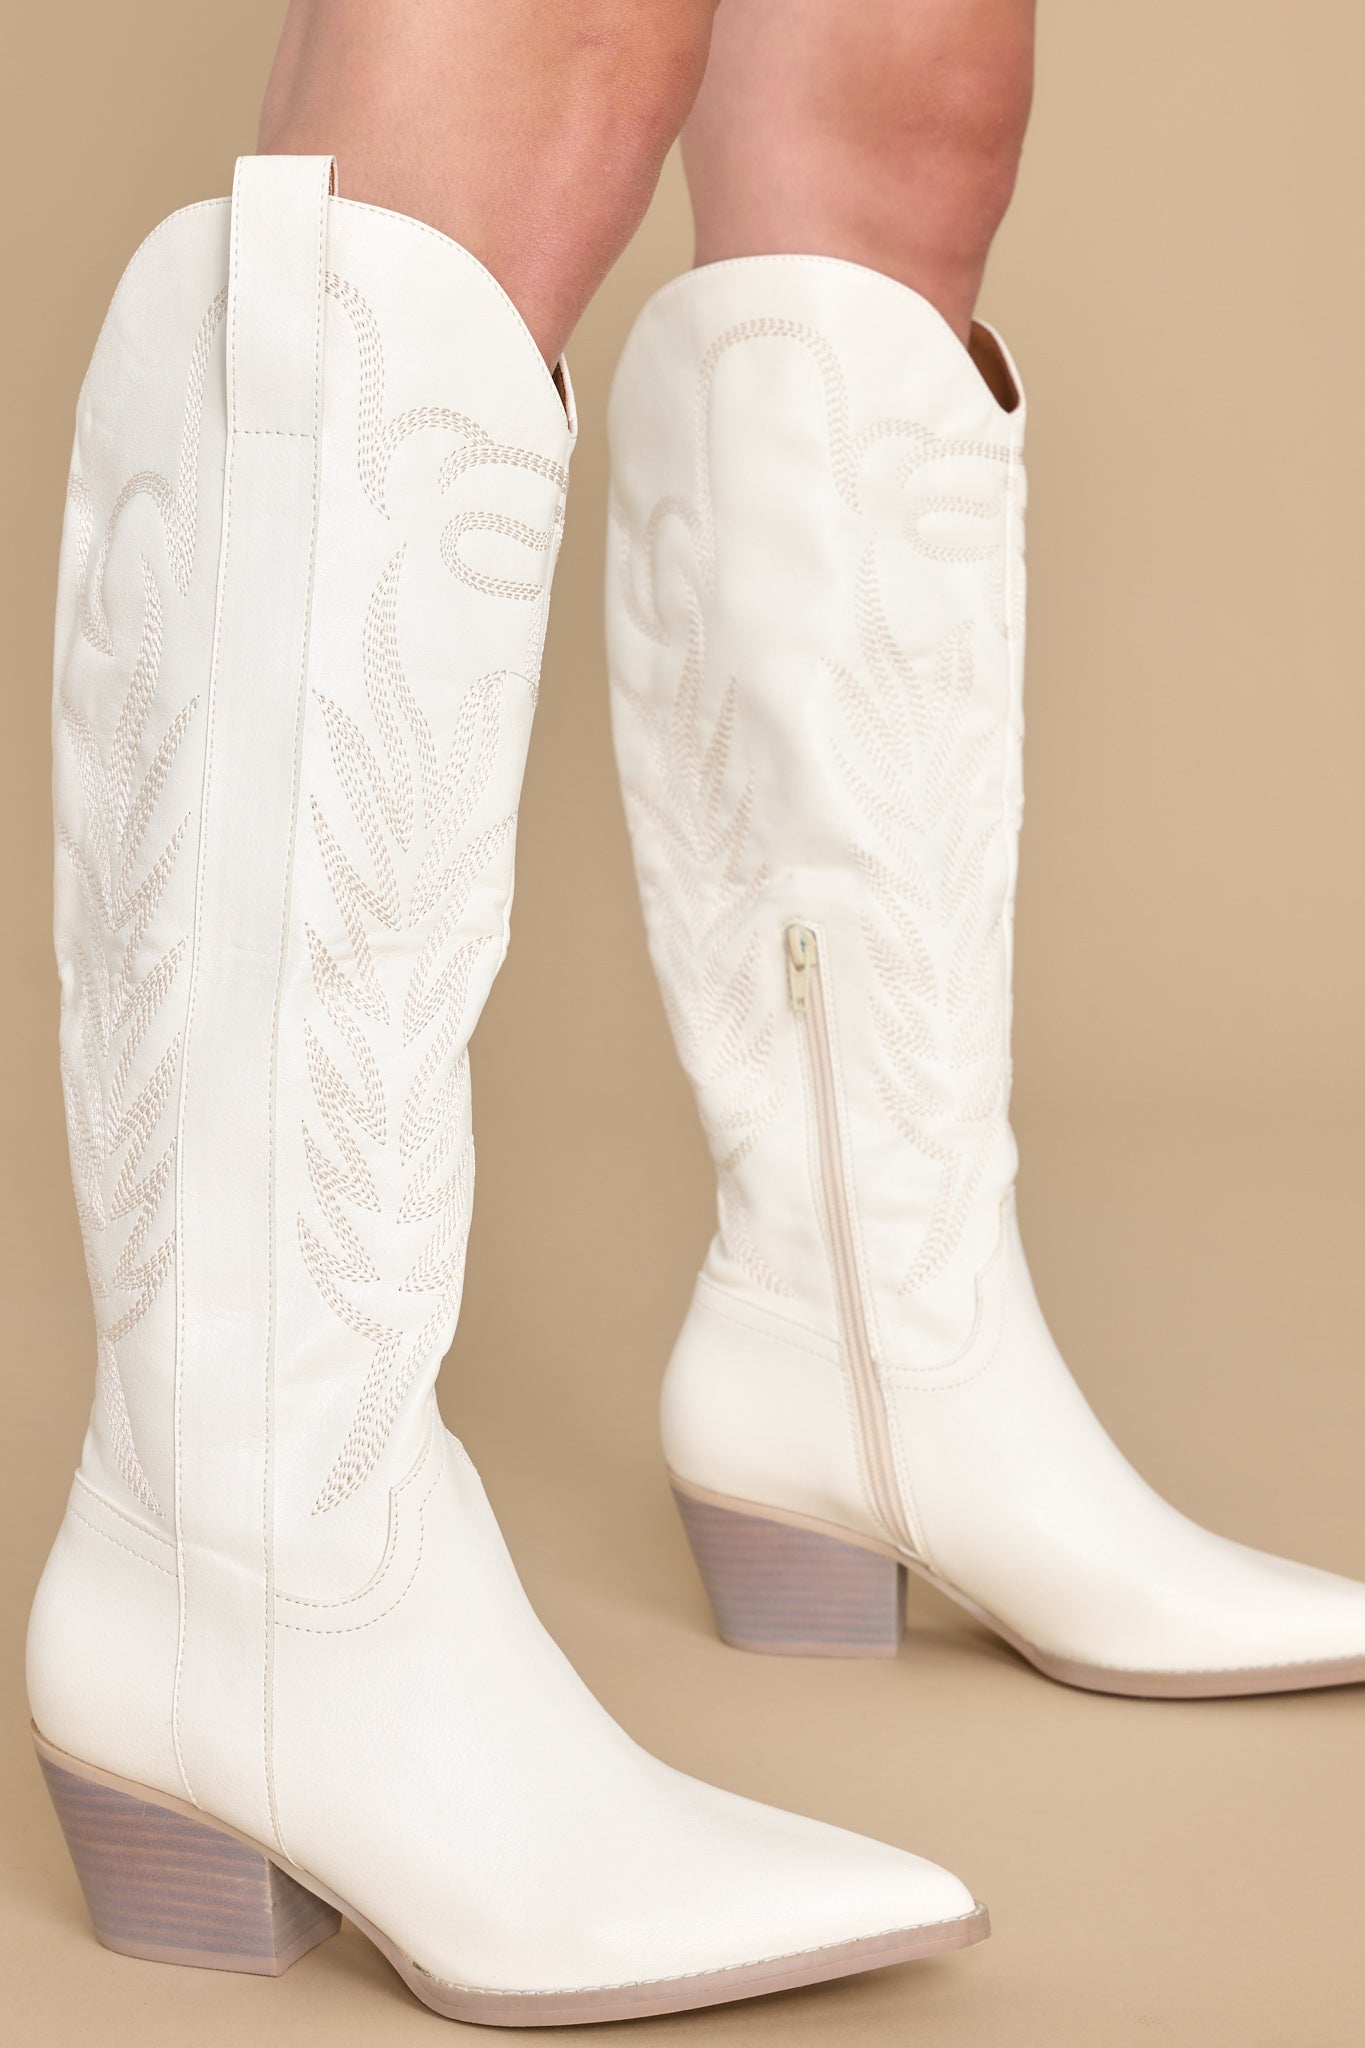 Transitioning to Fall with White Boots